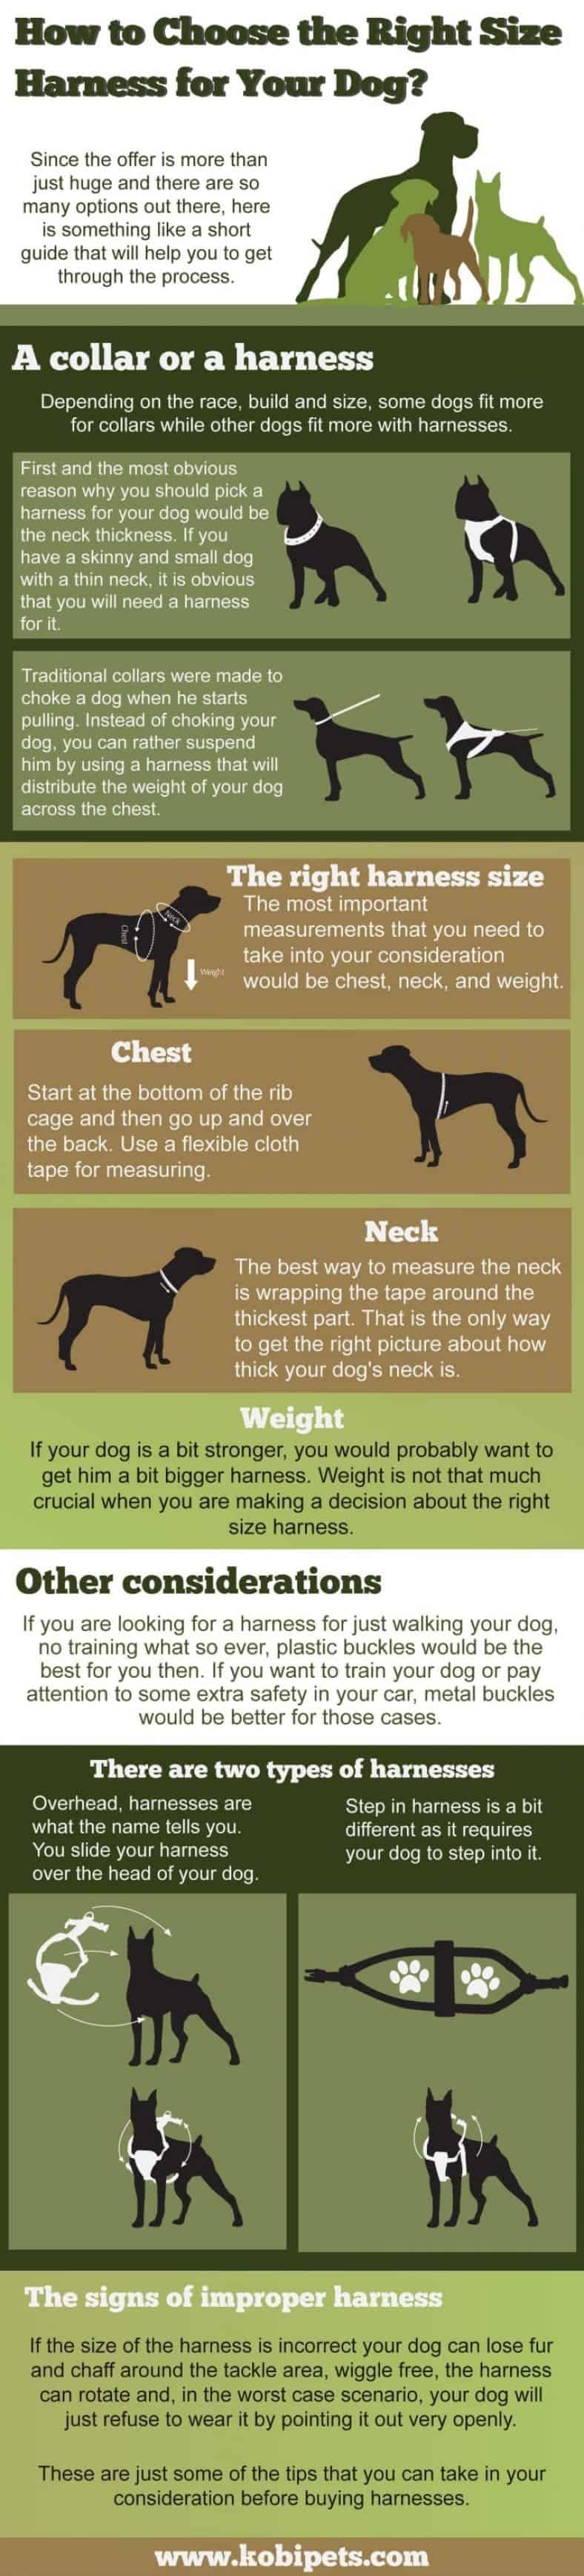 How to Choose the Right Size Harness for Your Dog? (Infographic)